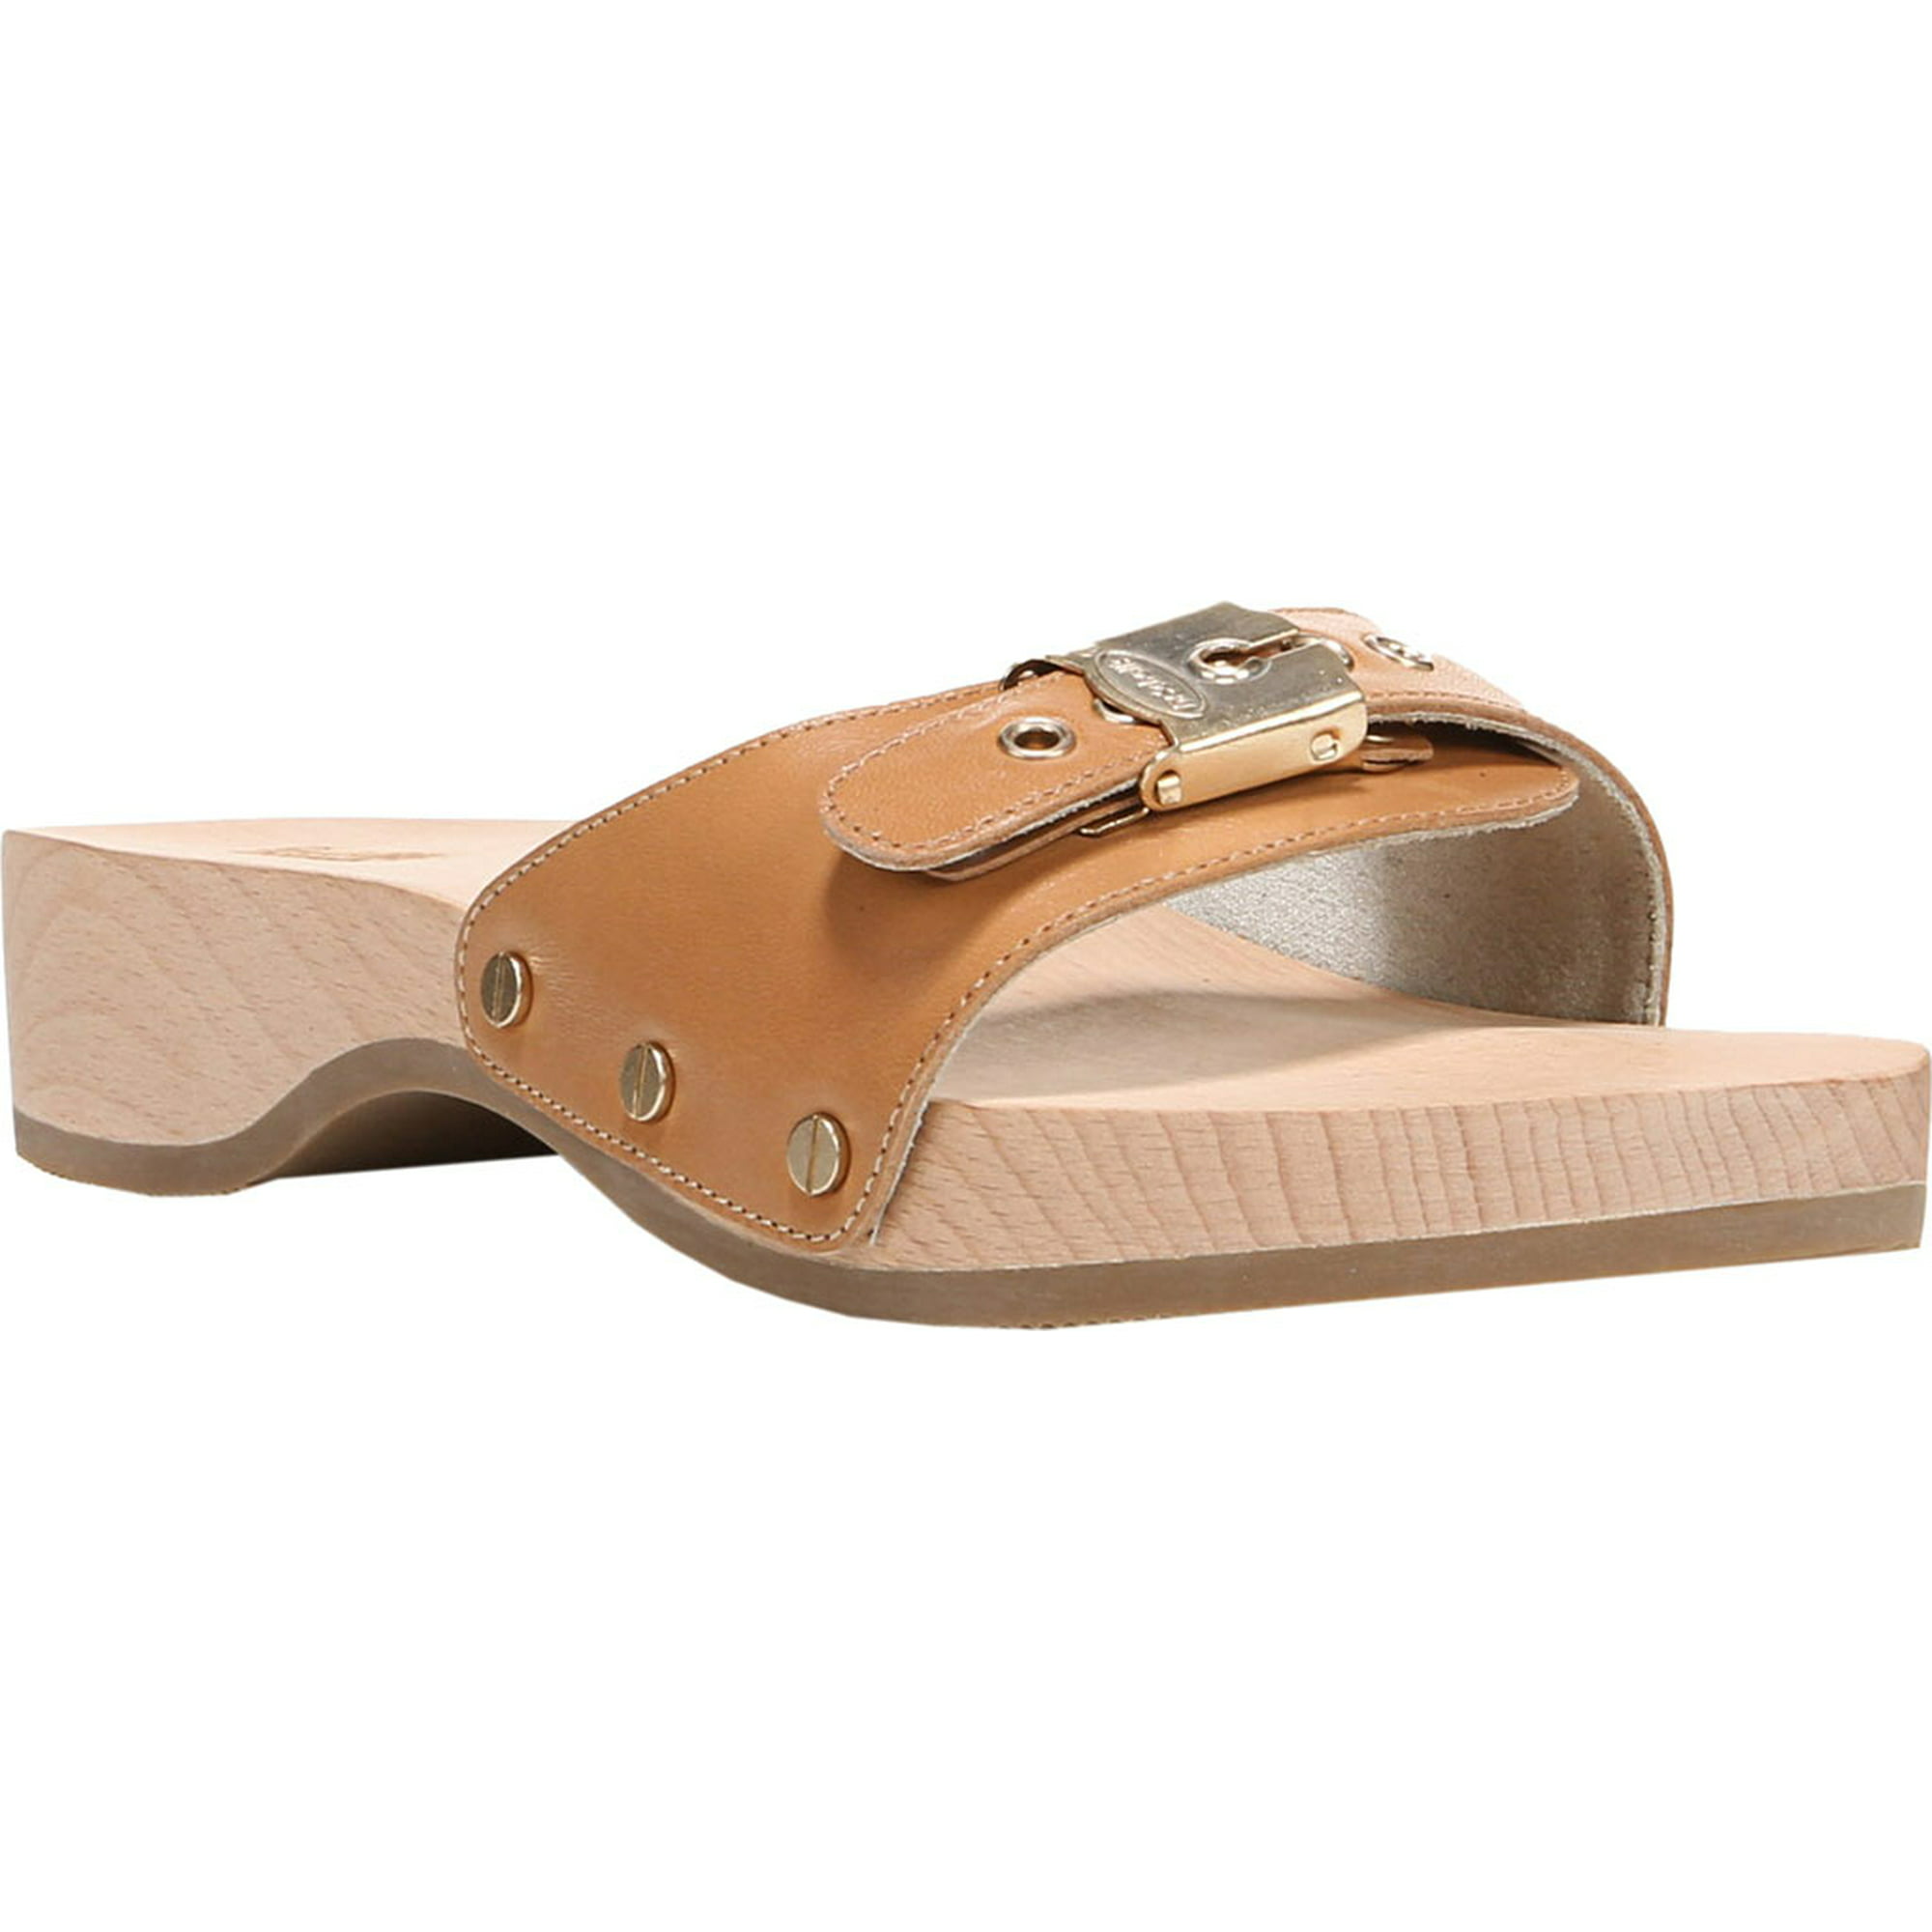 Penneven Albany mineral Dr. Scholl's Shoes Womens Original Leather Wood Slide Sandals - Walmart.com